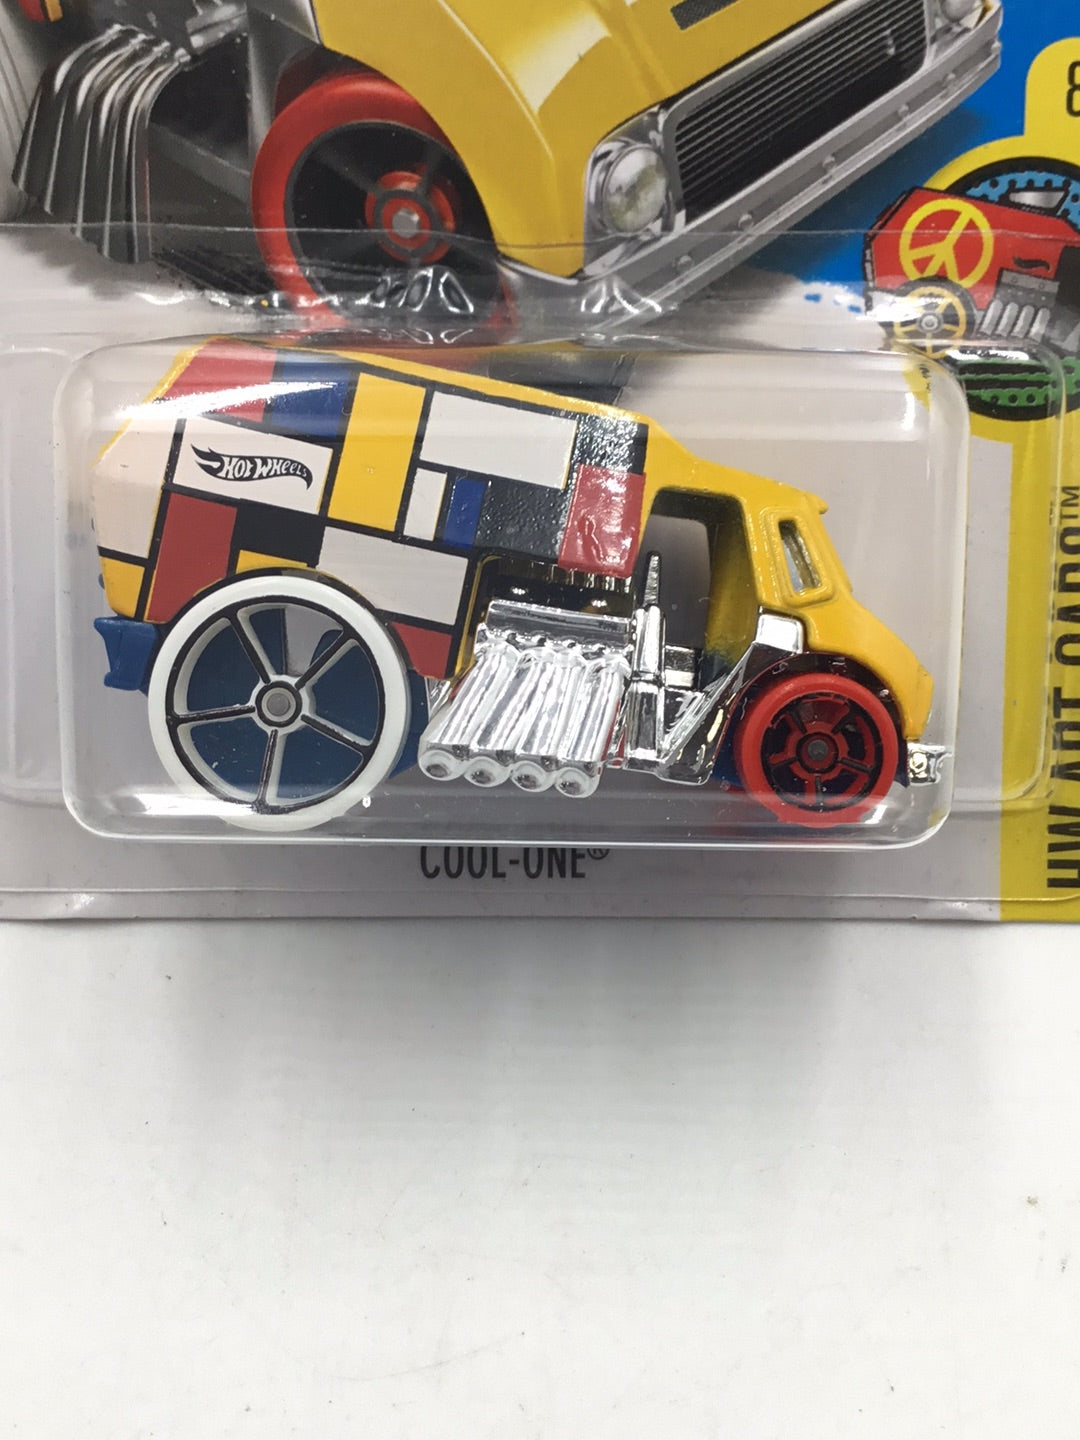 2017 Hot Wheels #8 Cool-One Kmart exclusive AA7